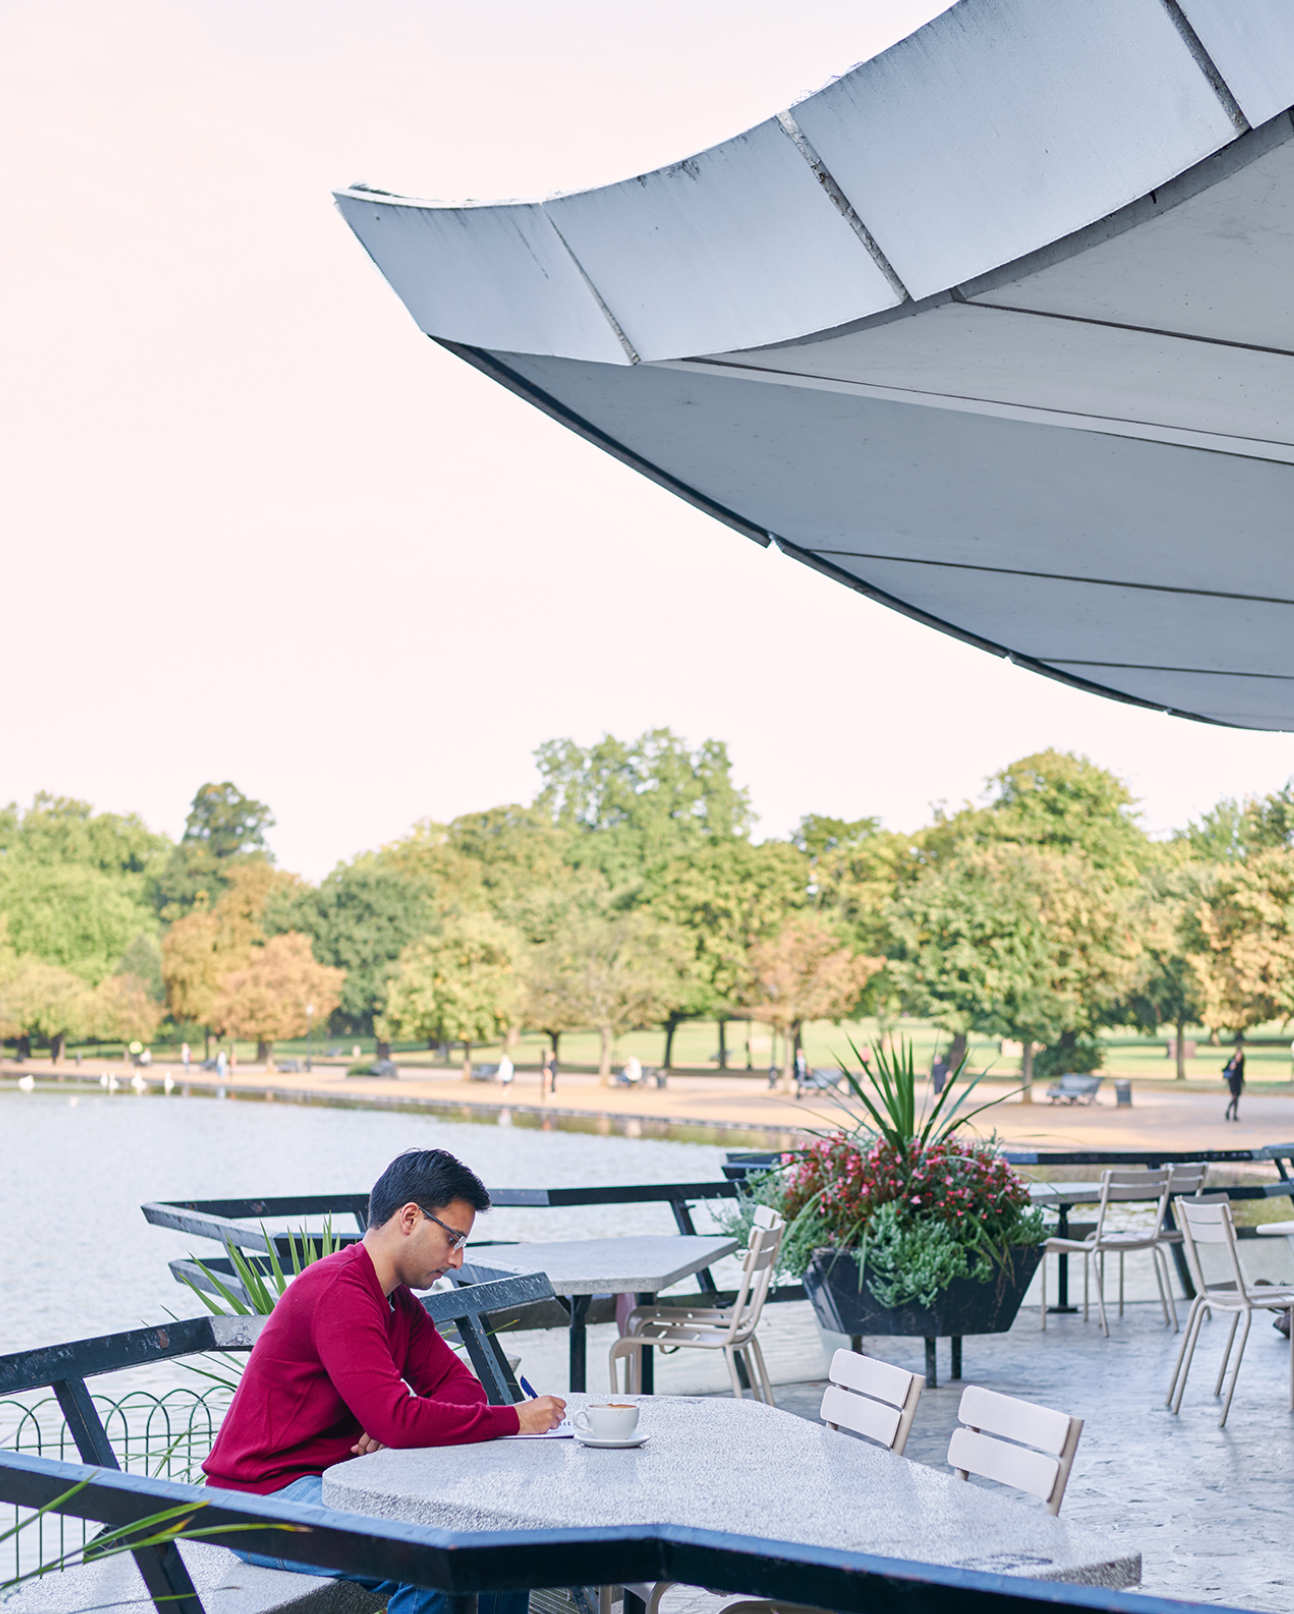 Imperial student Kunal Bhatia sat at a table by the Serpentine in Hyde Park